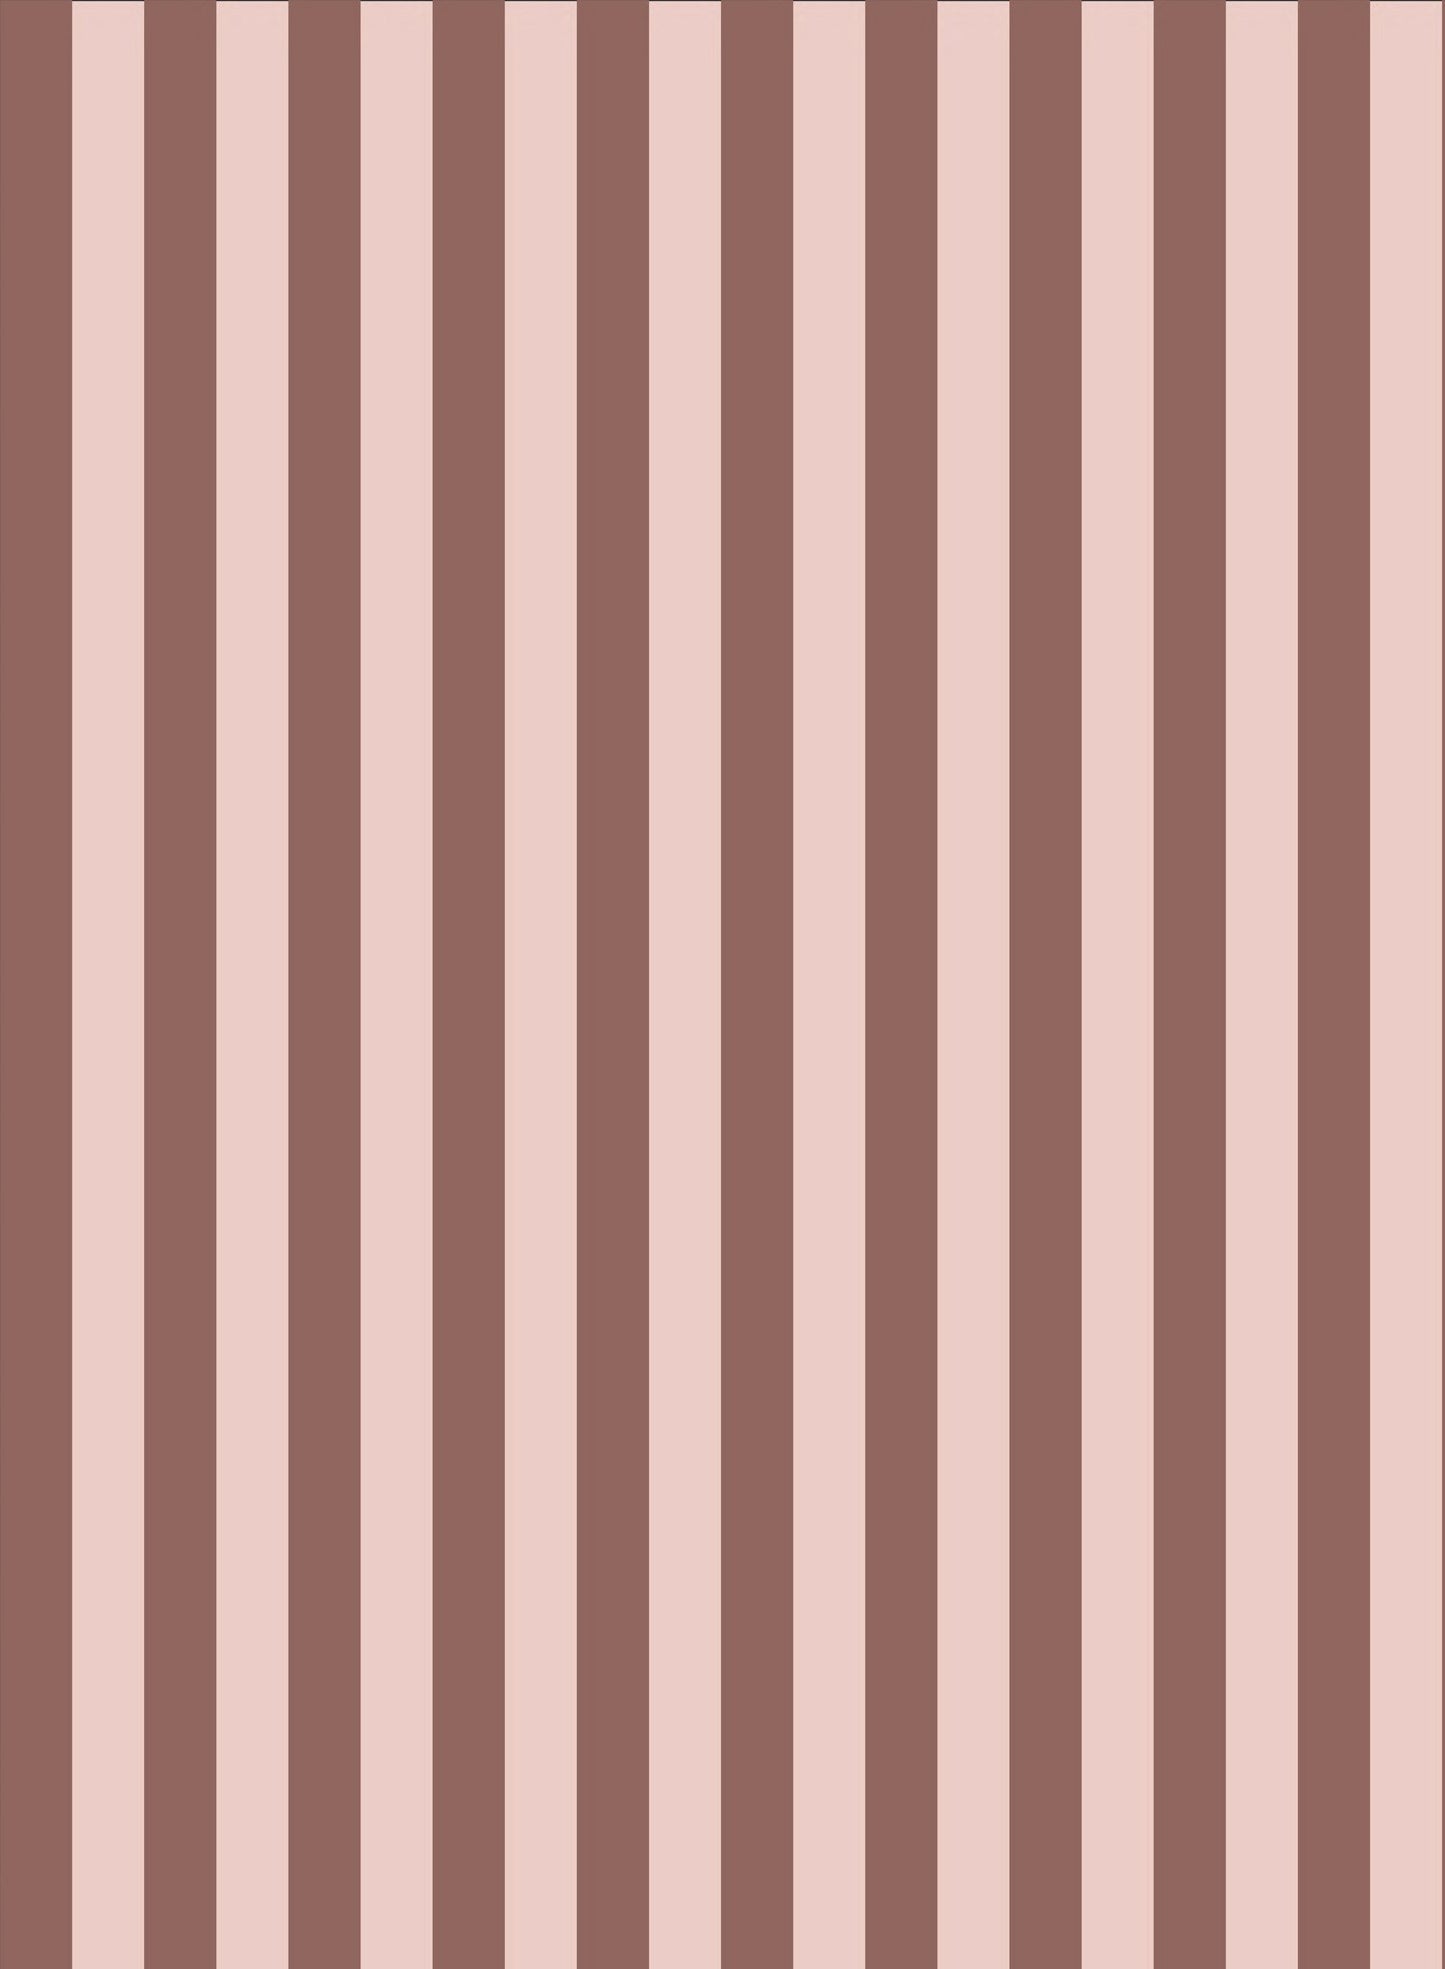 Sweet is a minimalist wallpaper by Opposite Wall of a classic pattern of tight two tone stripes.